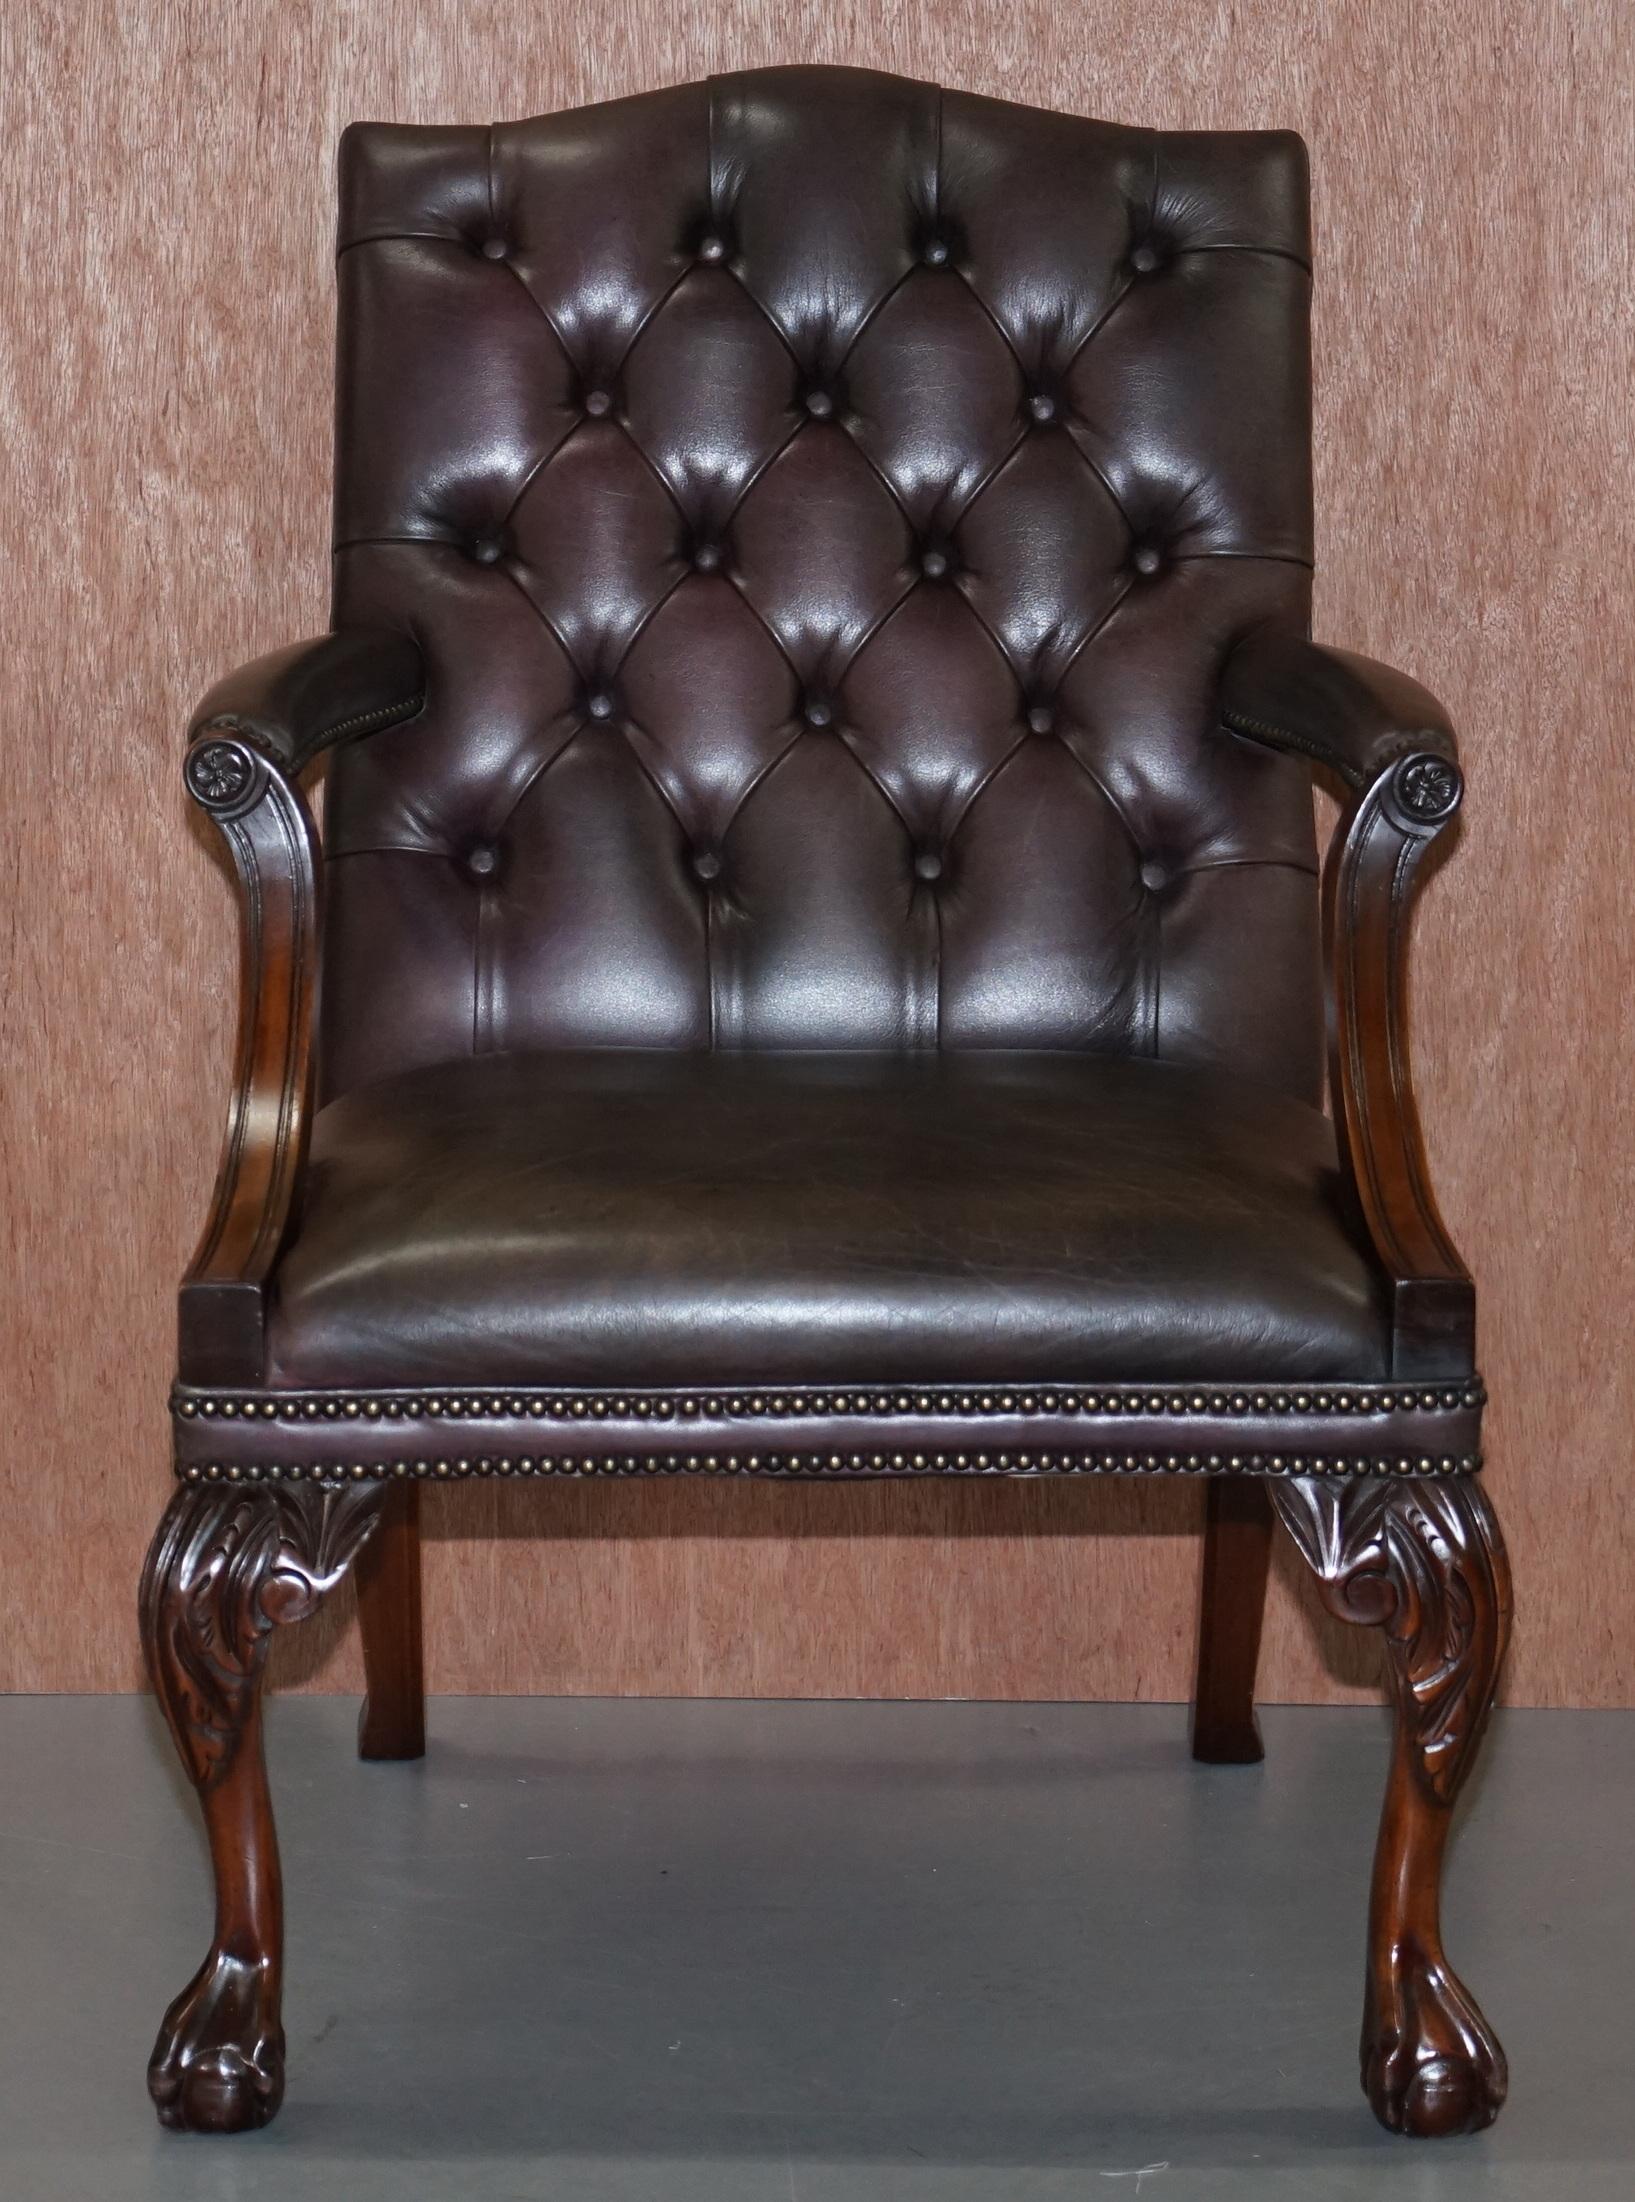 We are delighted to offer for sale this stunning hand carved mahogany framed George II style Gainsborough armchair with claw and ball feet

A very good looking well made and decorative armchair, the leather upholstery is Chesterfield tufted to the